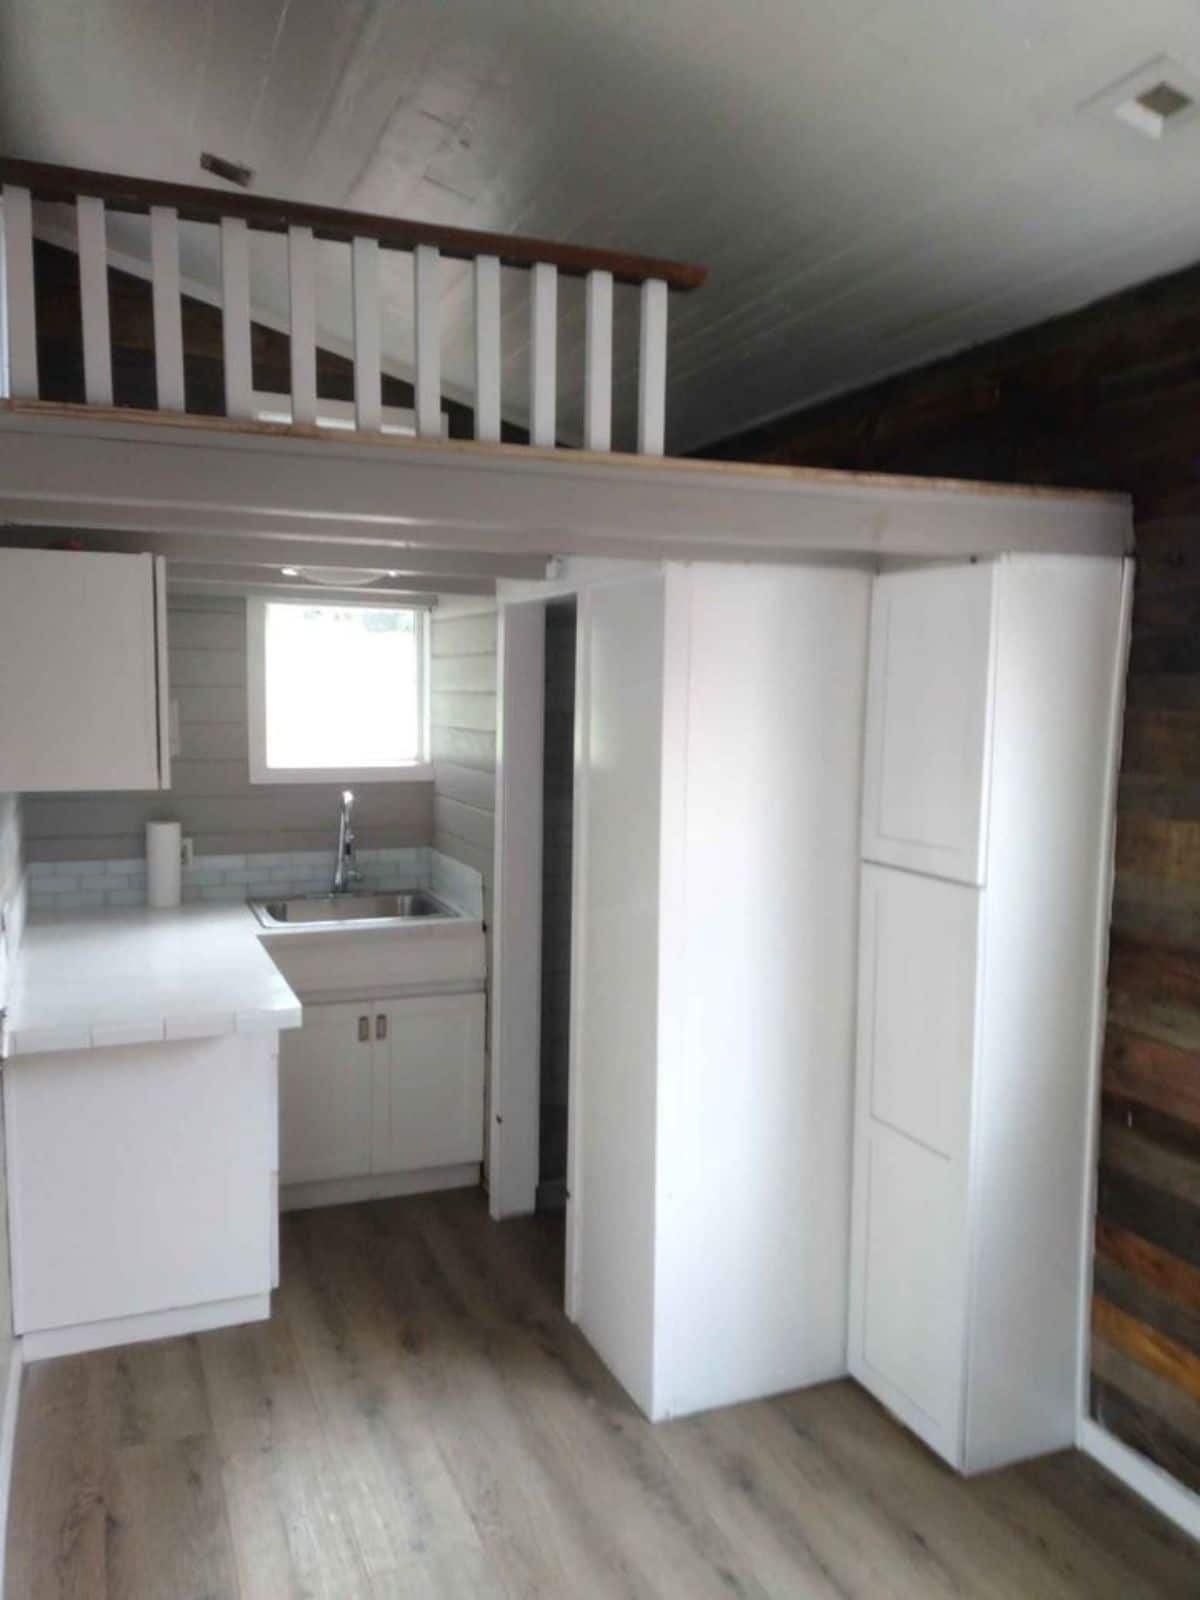 white pantry cabinets against reclaimed wood wall underneath loft with white railing